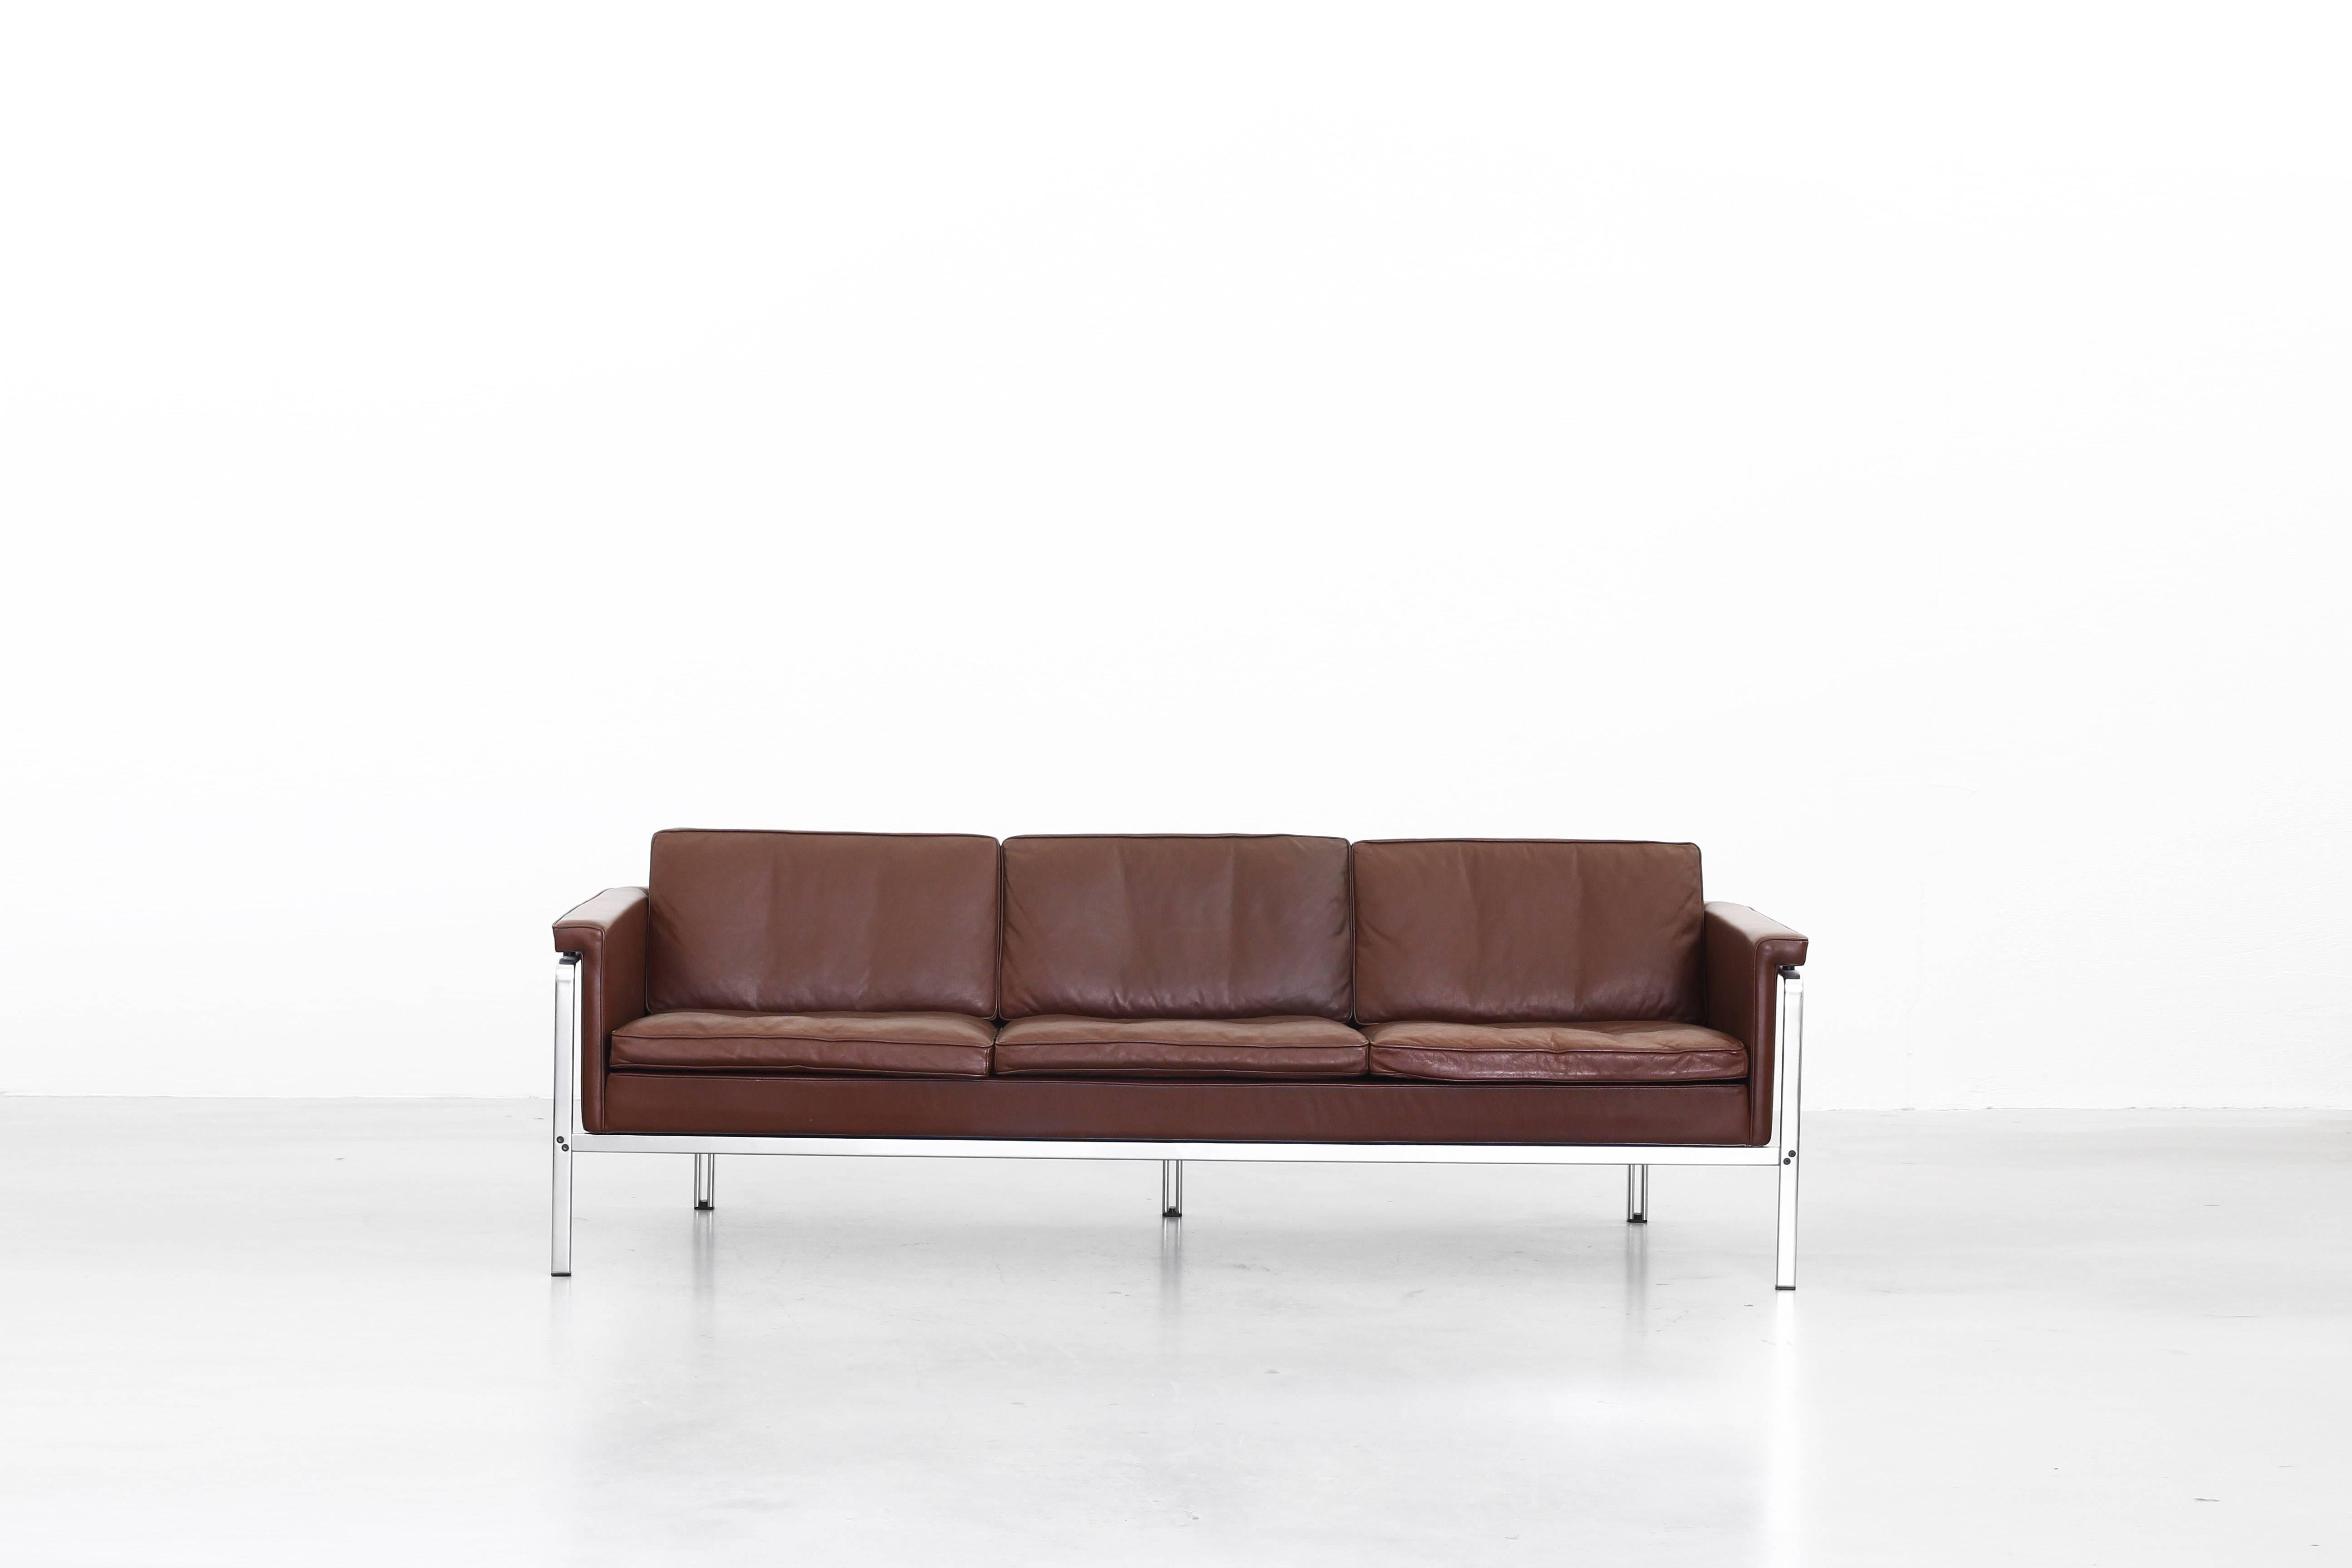 Beautiful sofa designed by Prof. Horst Brüning and manufactured by Alfred Kill International, Germany 1968. This sofa comes with a great brown leather in an excellent condition with just little traces of usage.